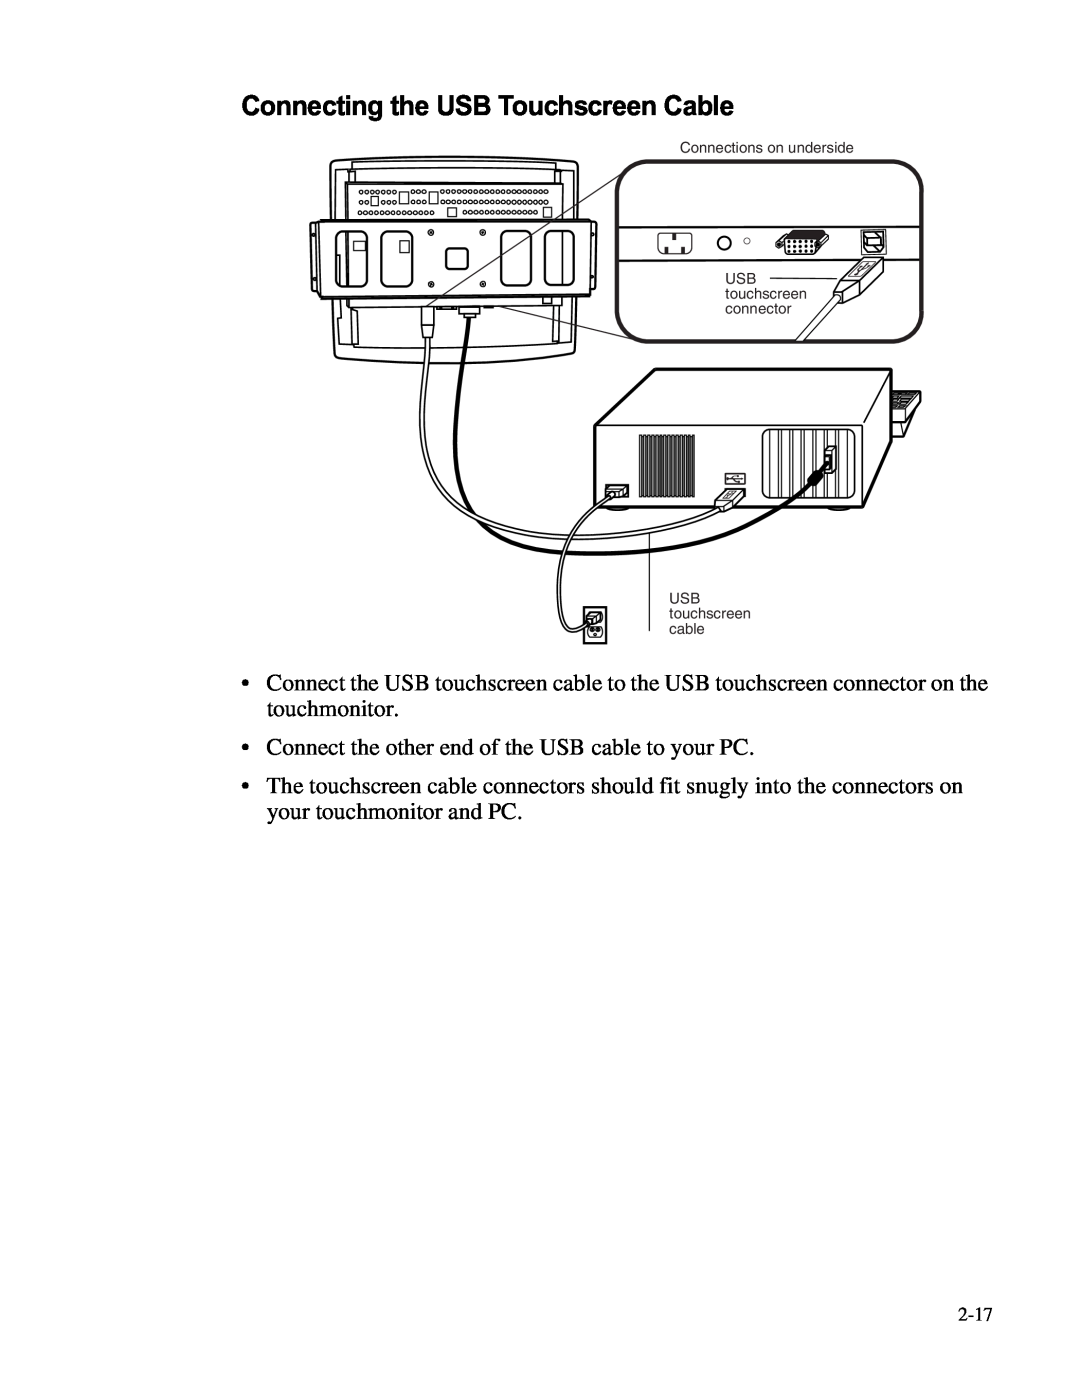 Elo TouchSystems LCD manual Connecting the USB Touchscreen Cable 